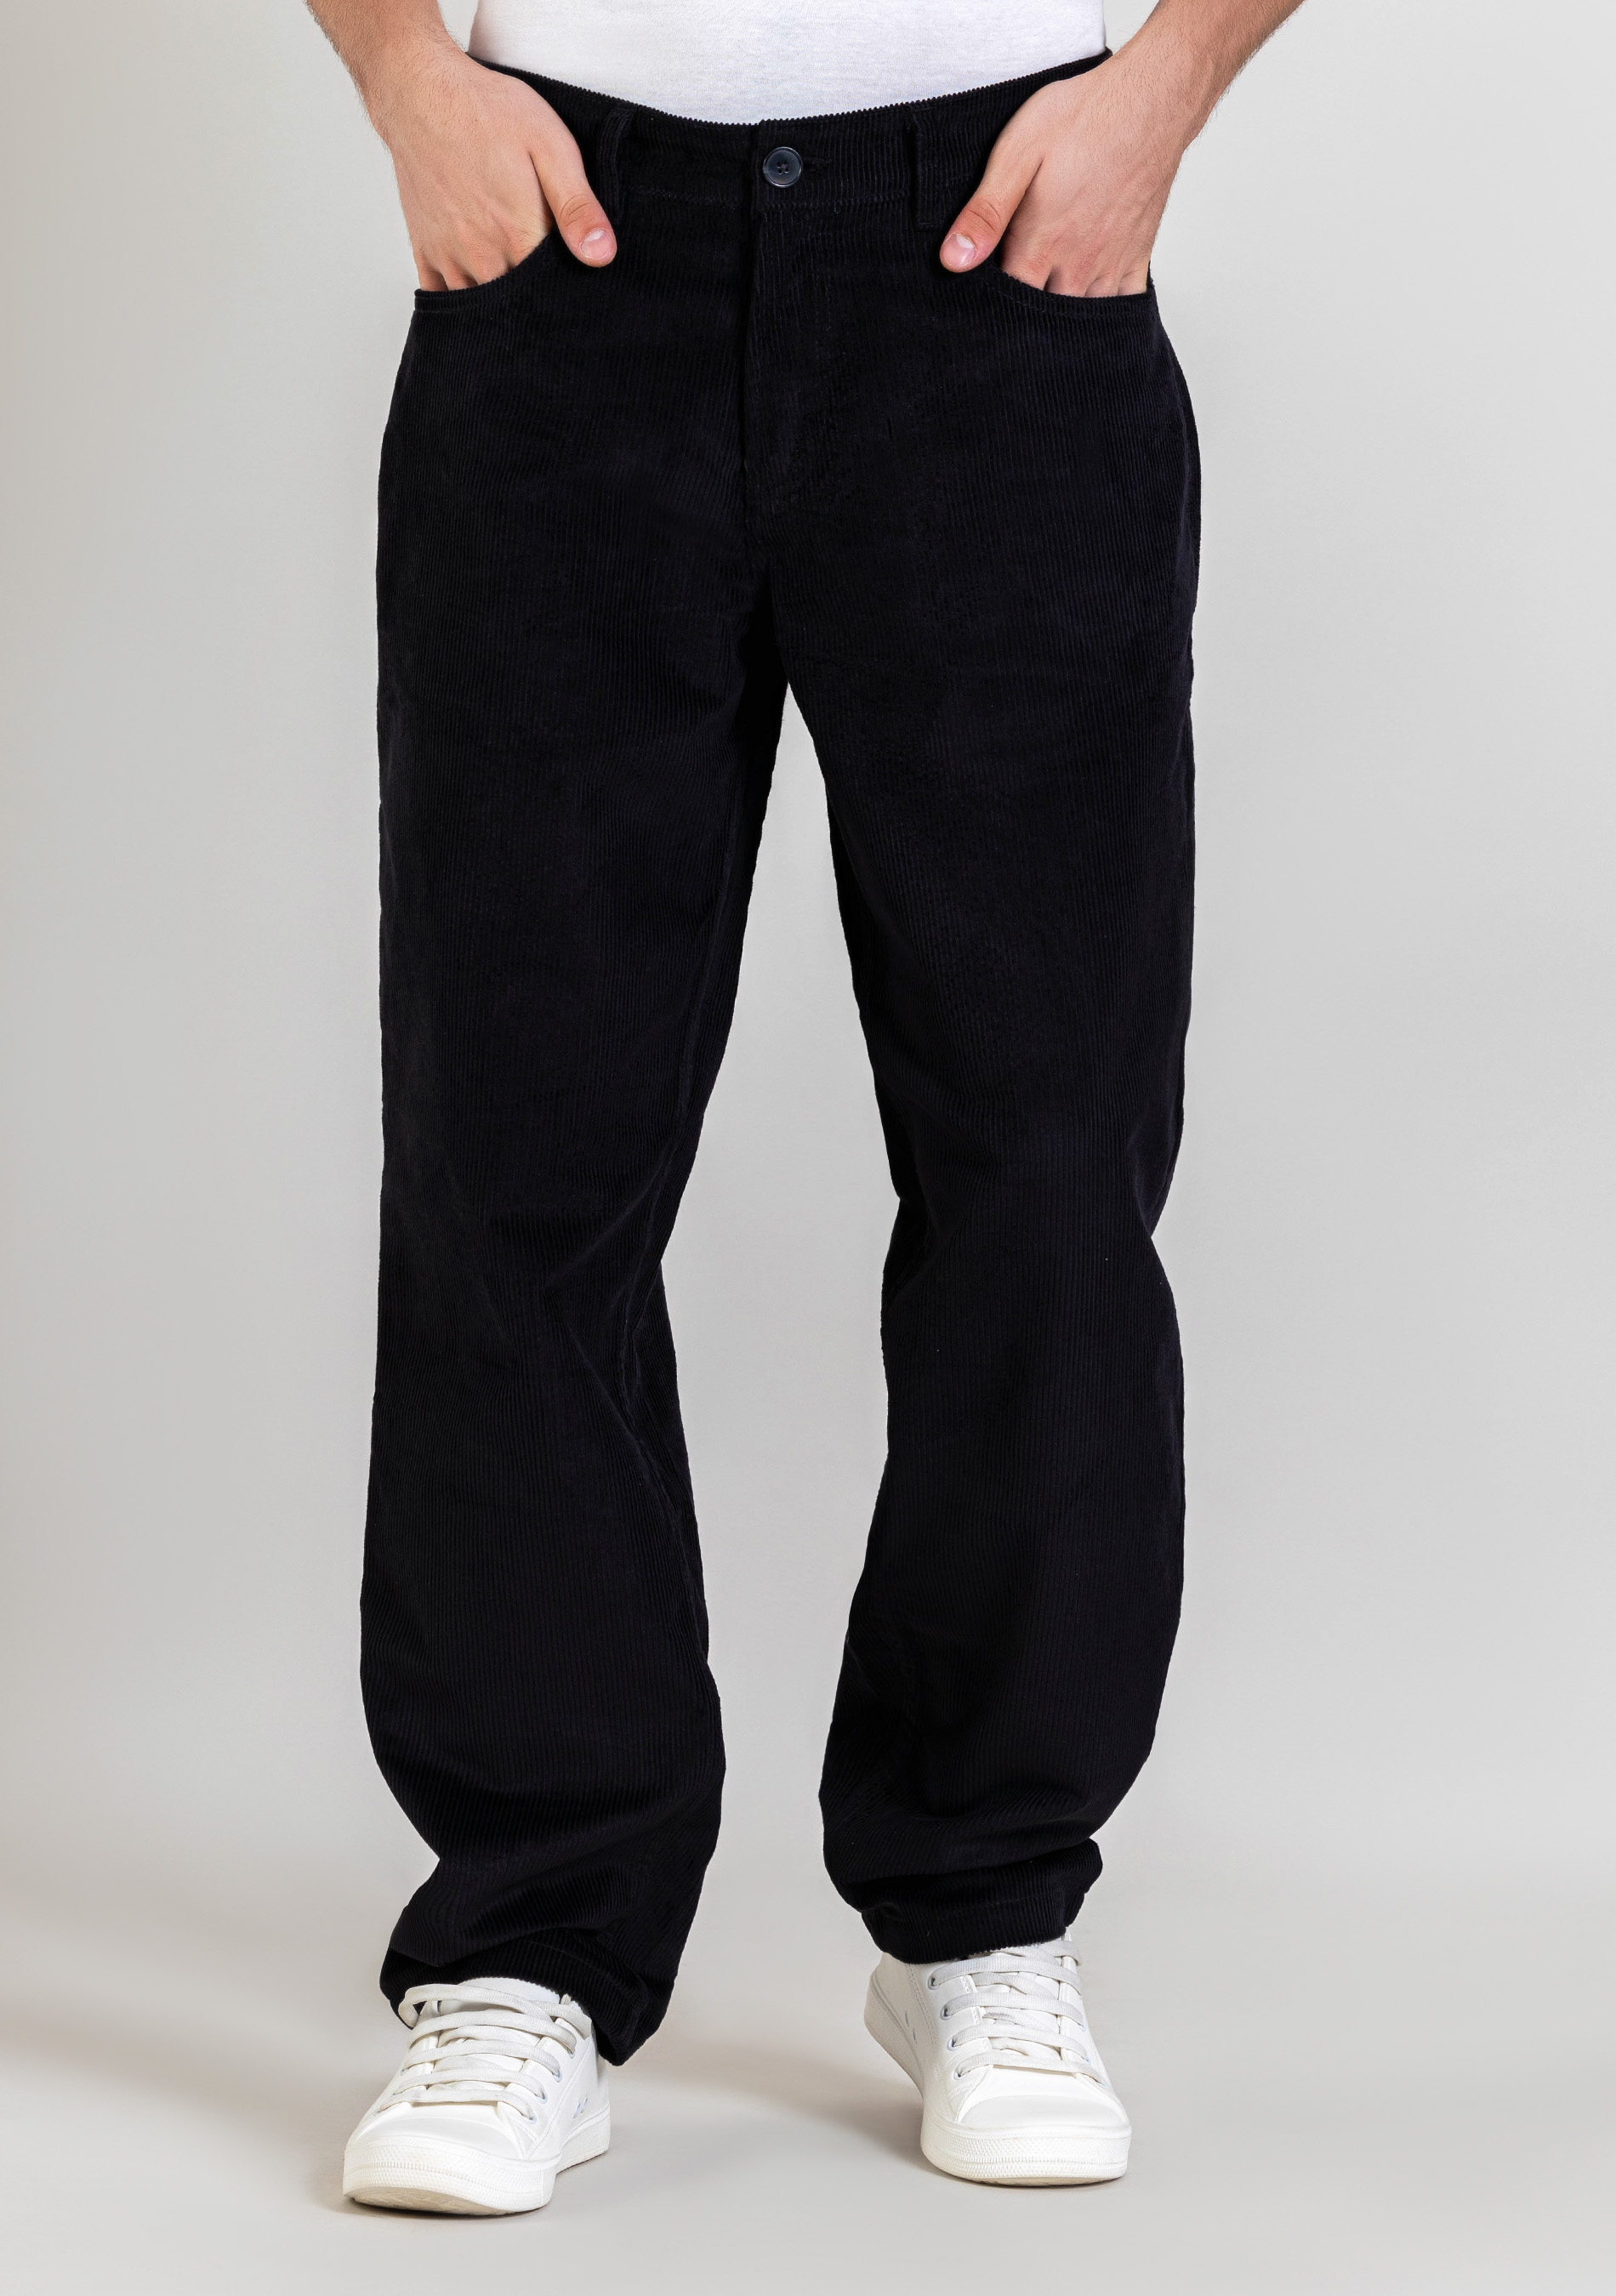 Black Relaxed Fit Men's 5 Pocket Corduroy Trousers - Buy Online in ...